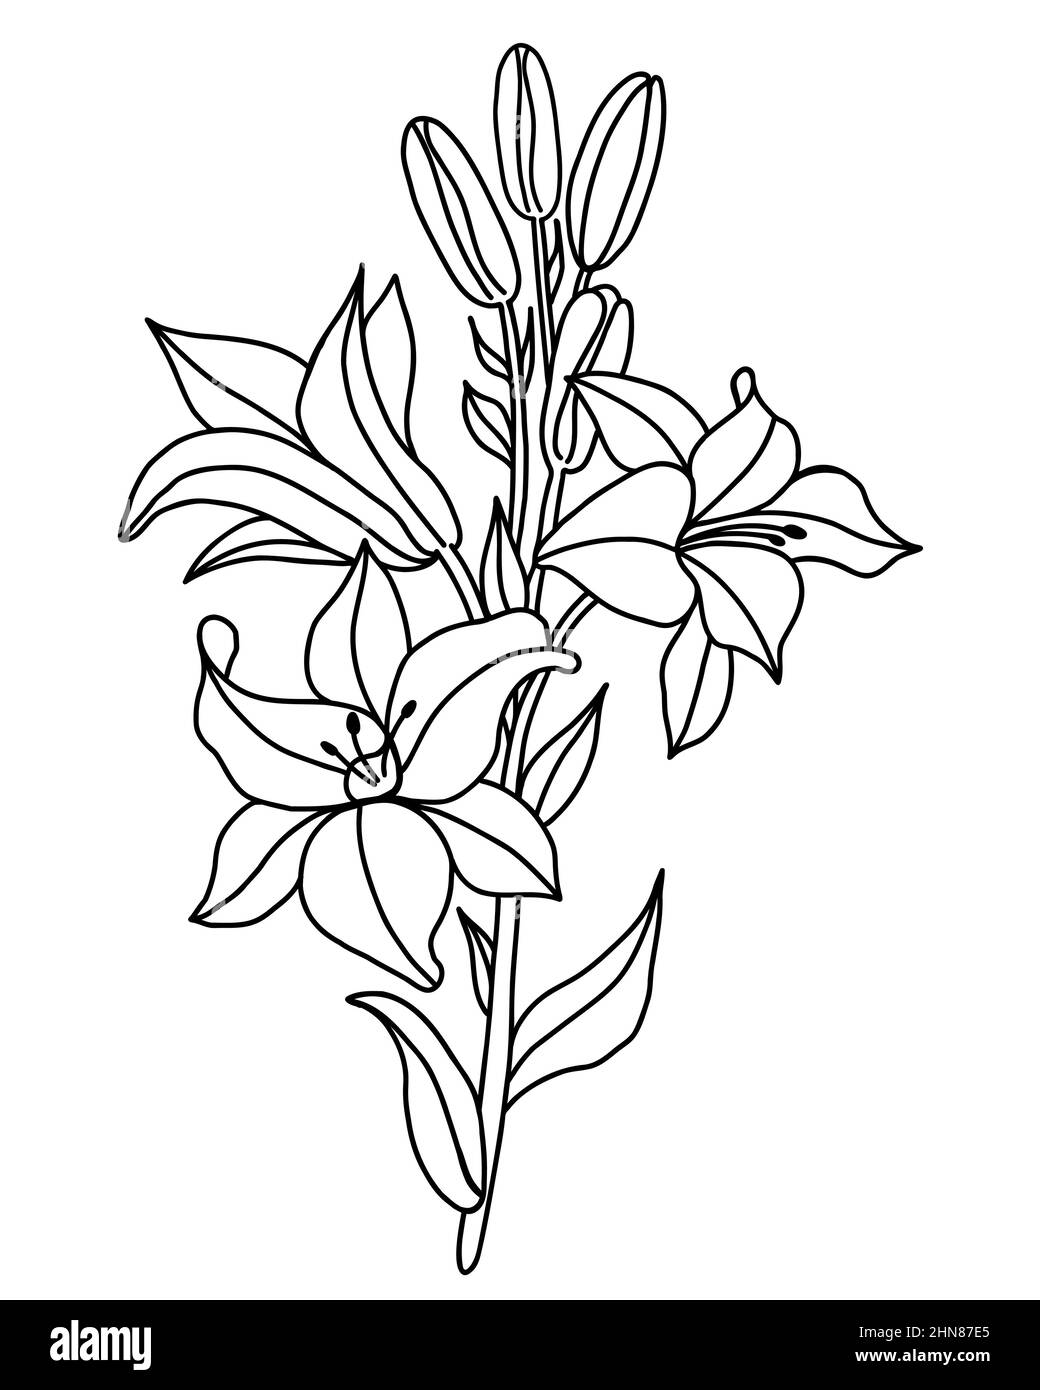 Black outline of lily flowers. Branch bouquet with flowers and buds. Vector illustration. isolated on white background. Ornamental plant for design Stock Vector